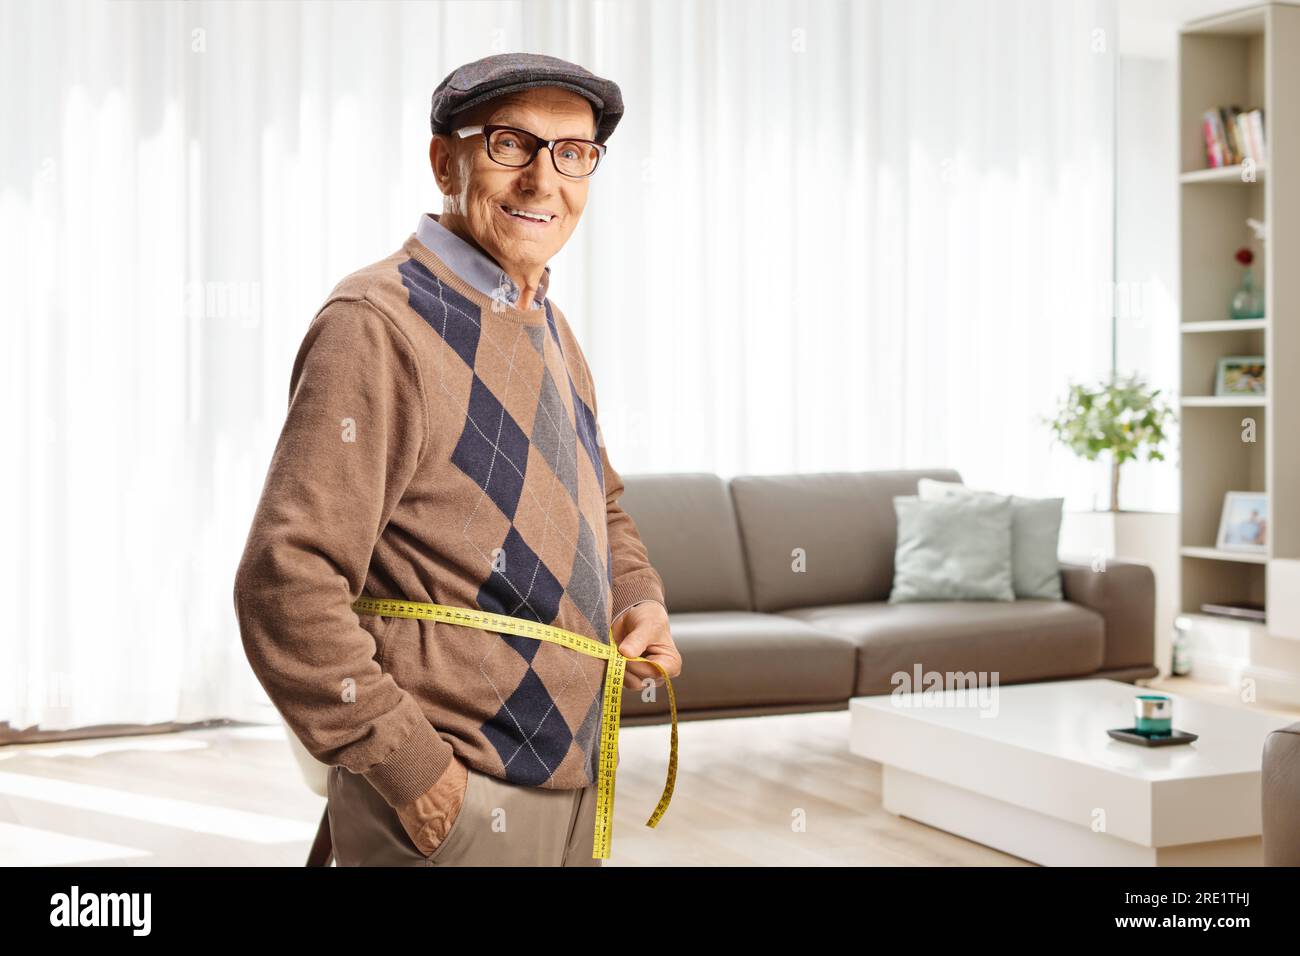 Elderly man measuring waist with a tape inside a living room Stock Photo